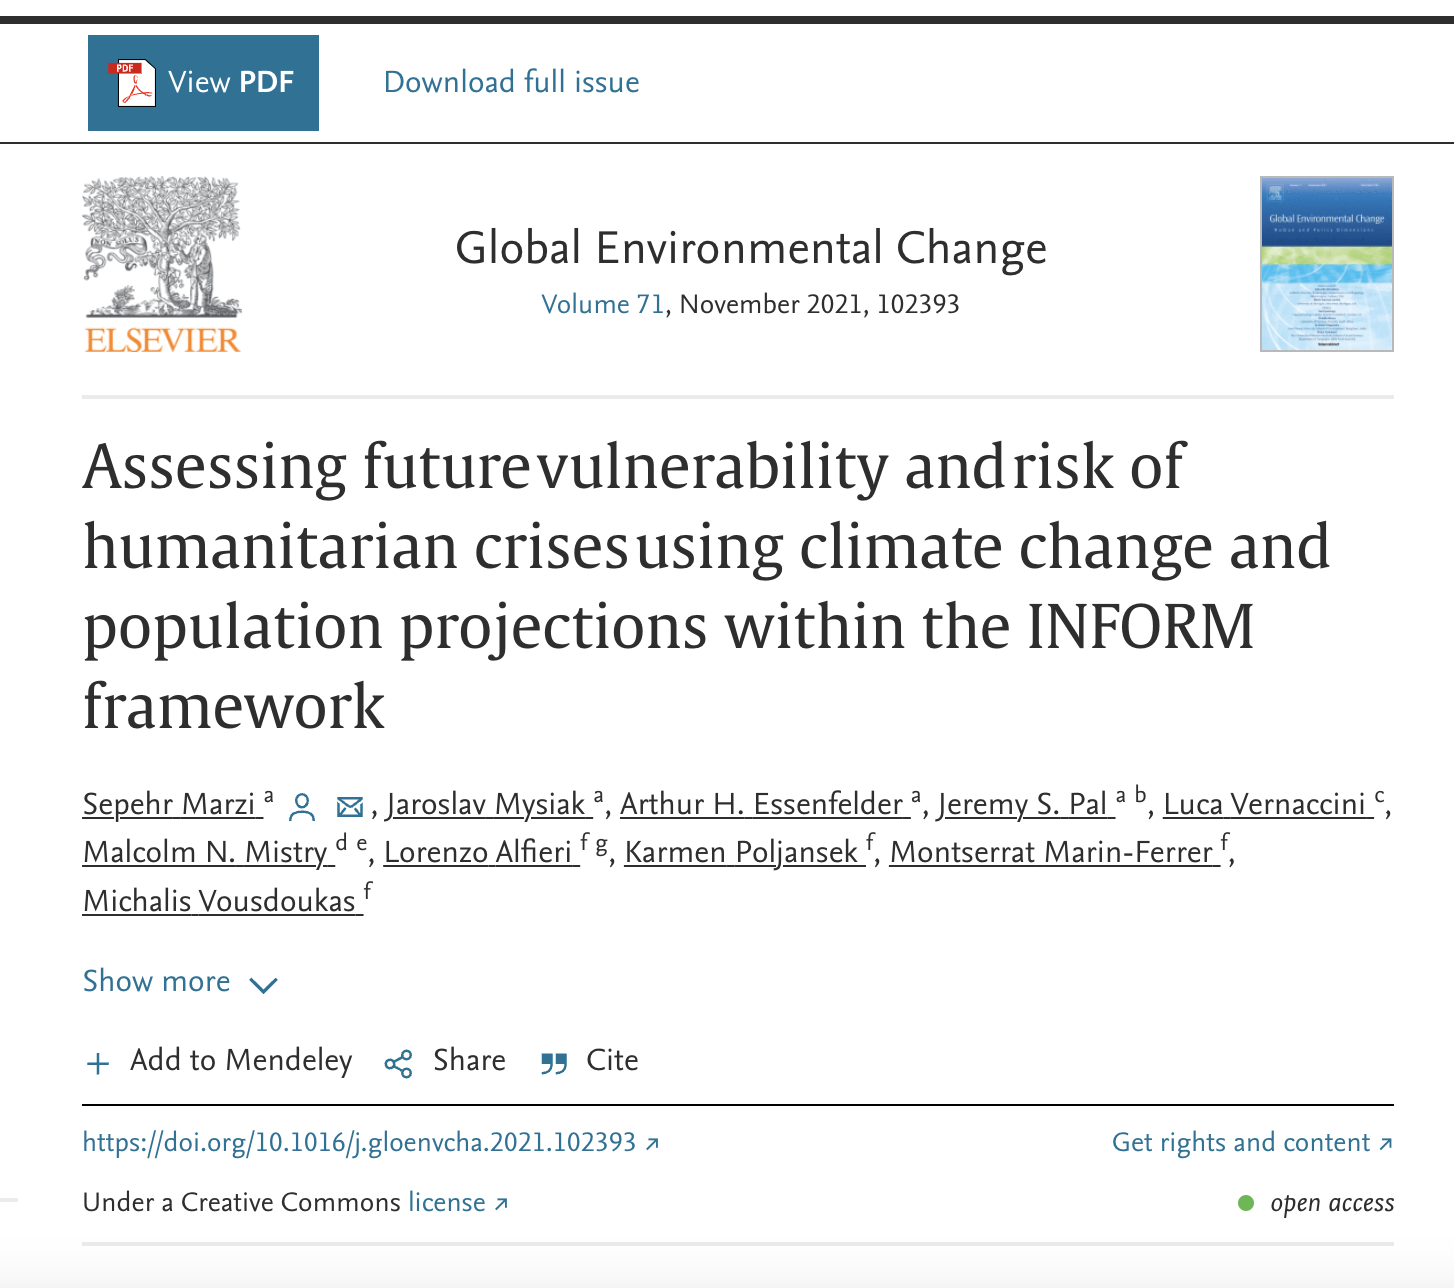 WP5 International cooperation, development and resilience- Assessing future vulnerability and risk of humanitarian crises using climate change and population projections within the INFORM framework